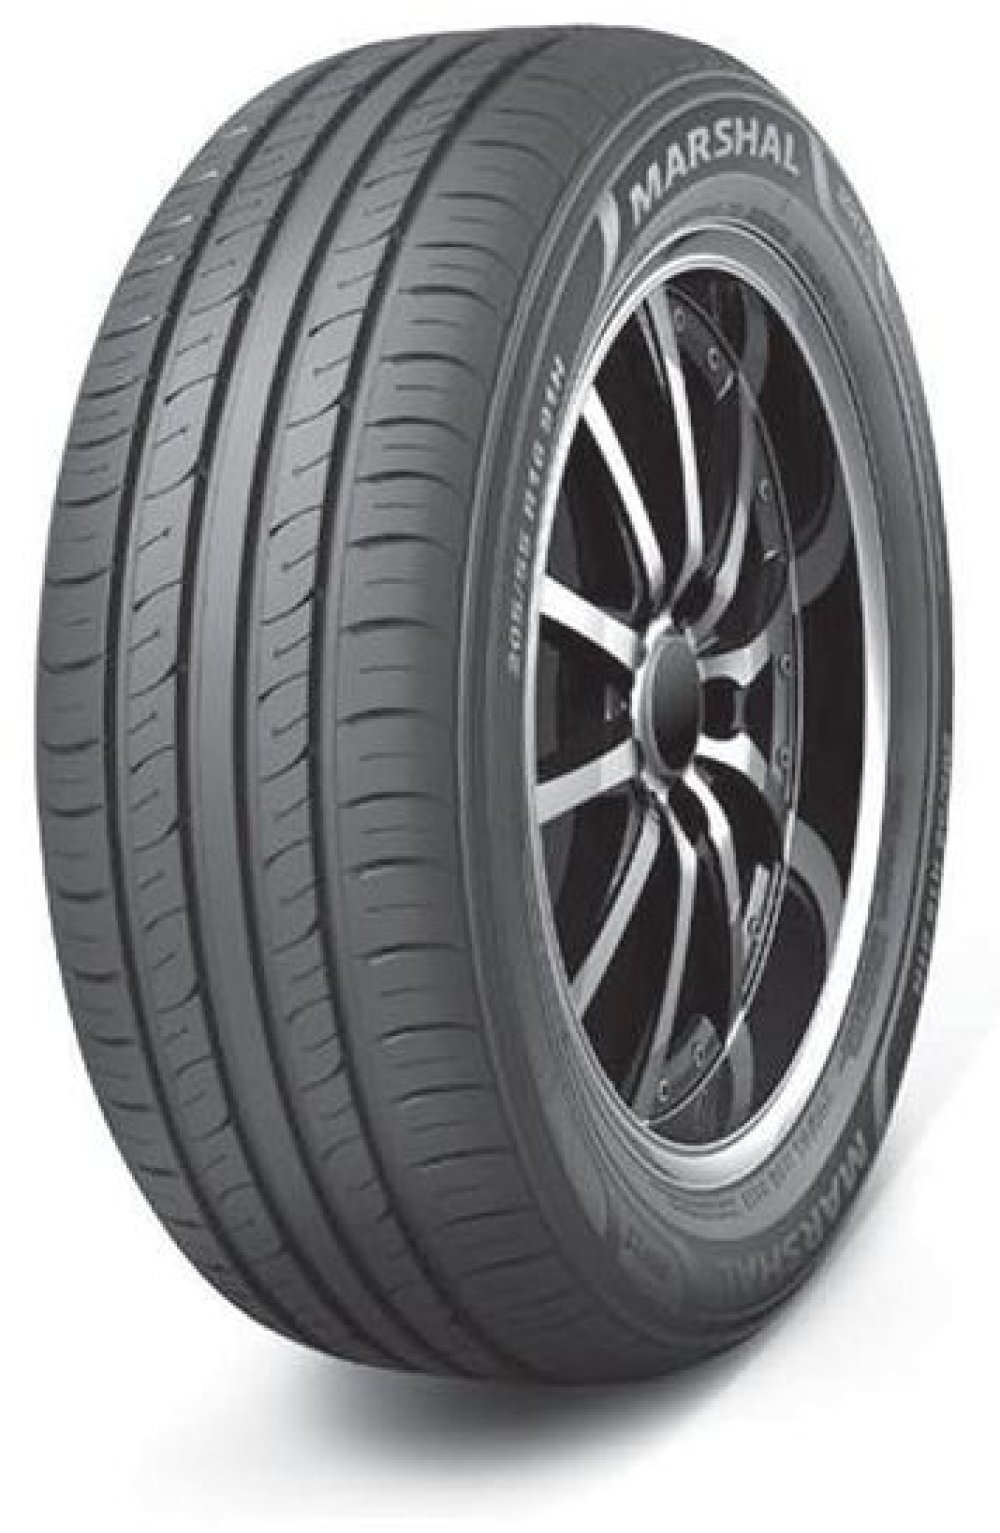 Marshal MH12 ( 165/80 R13 83T )